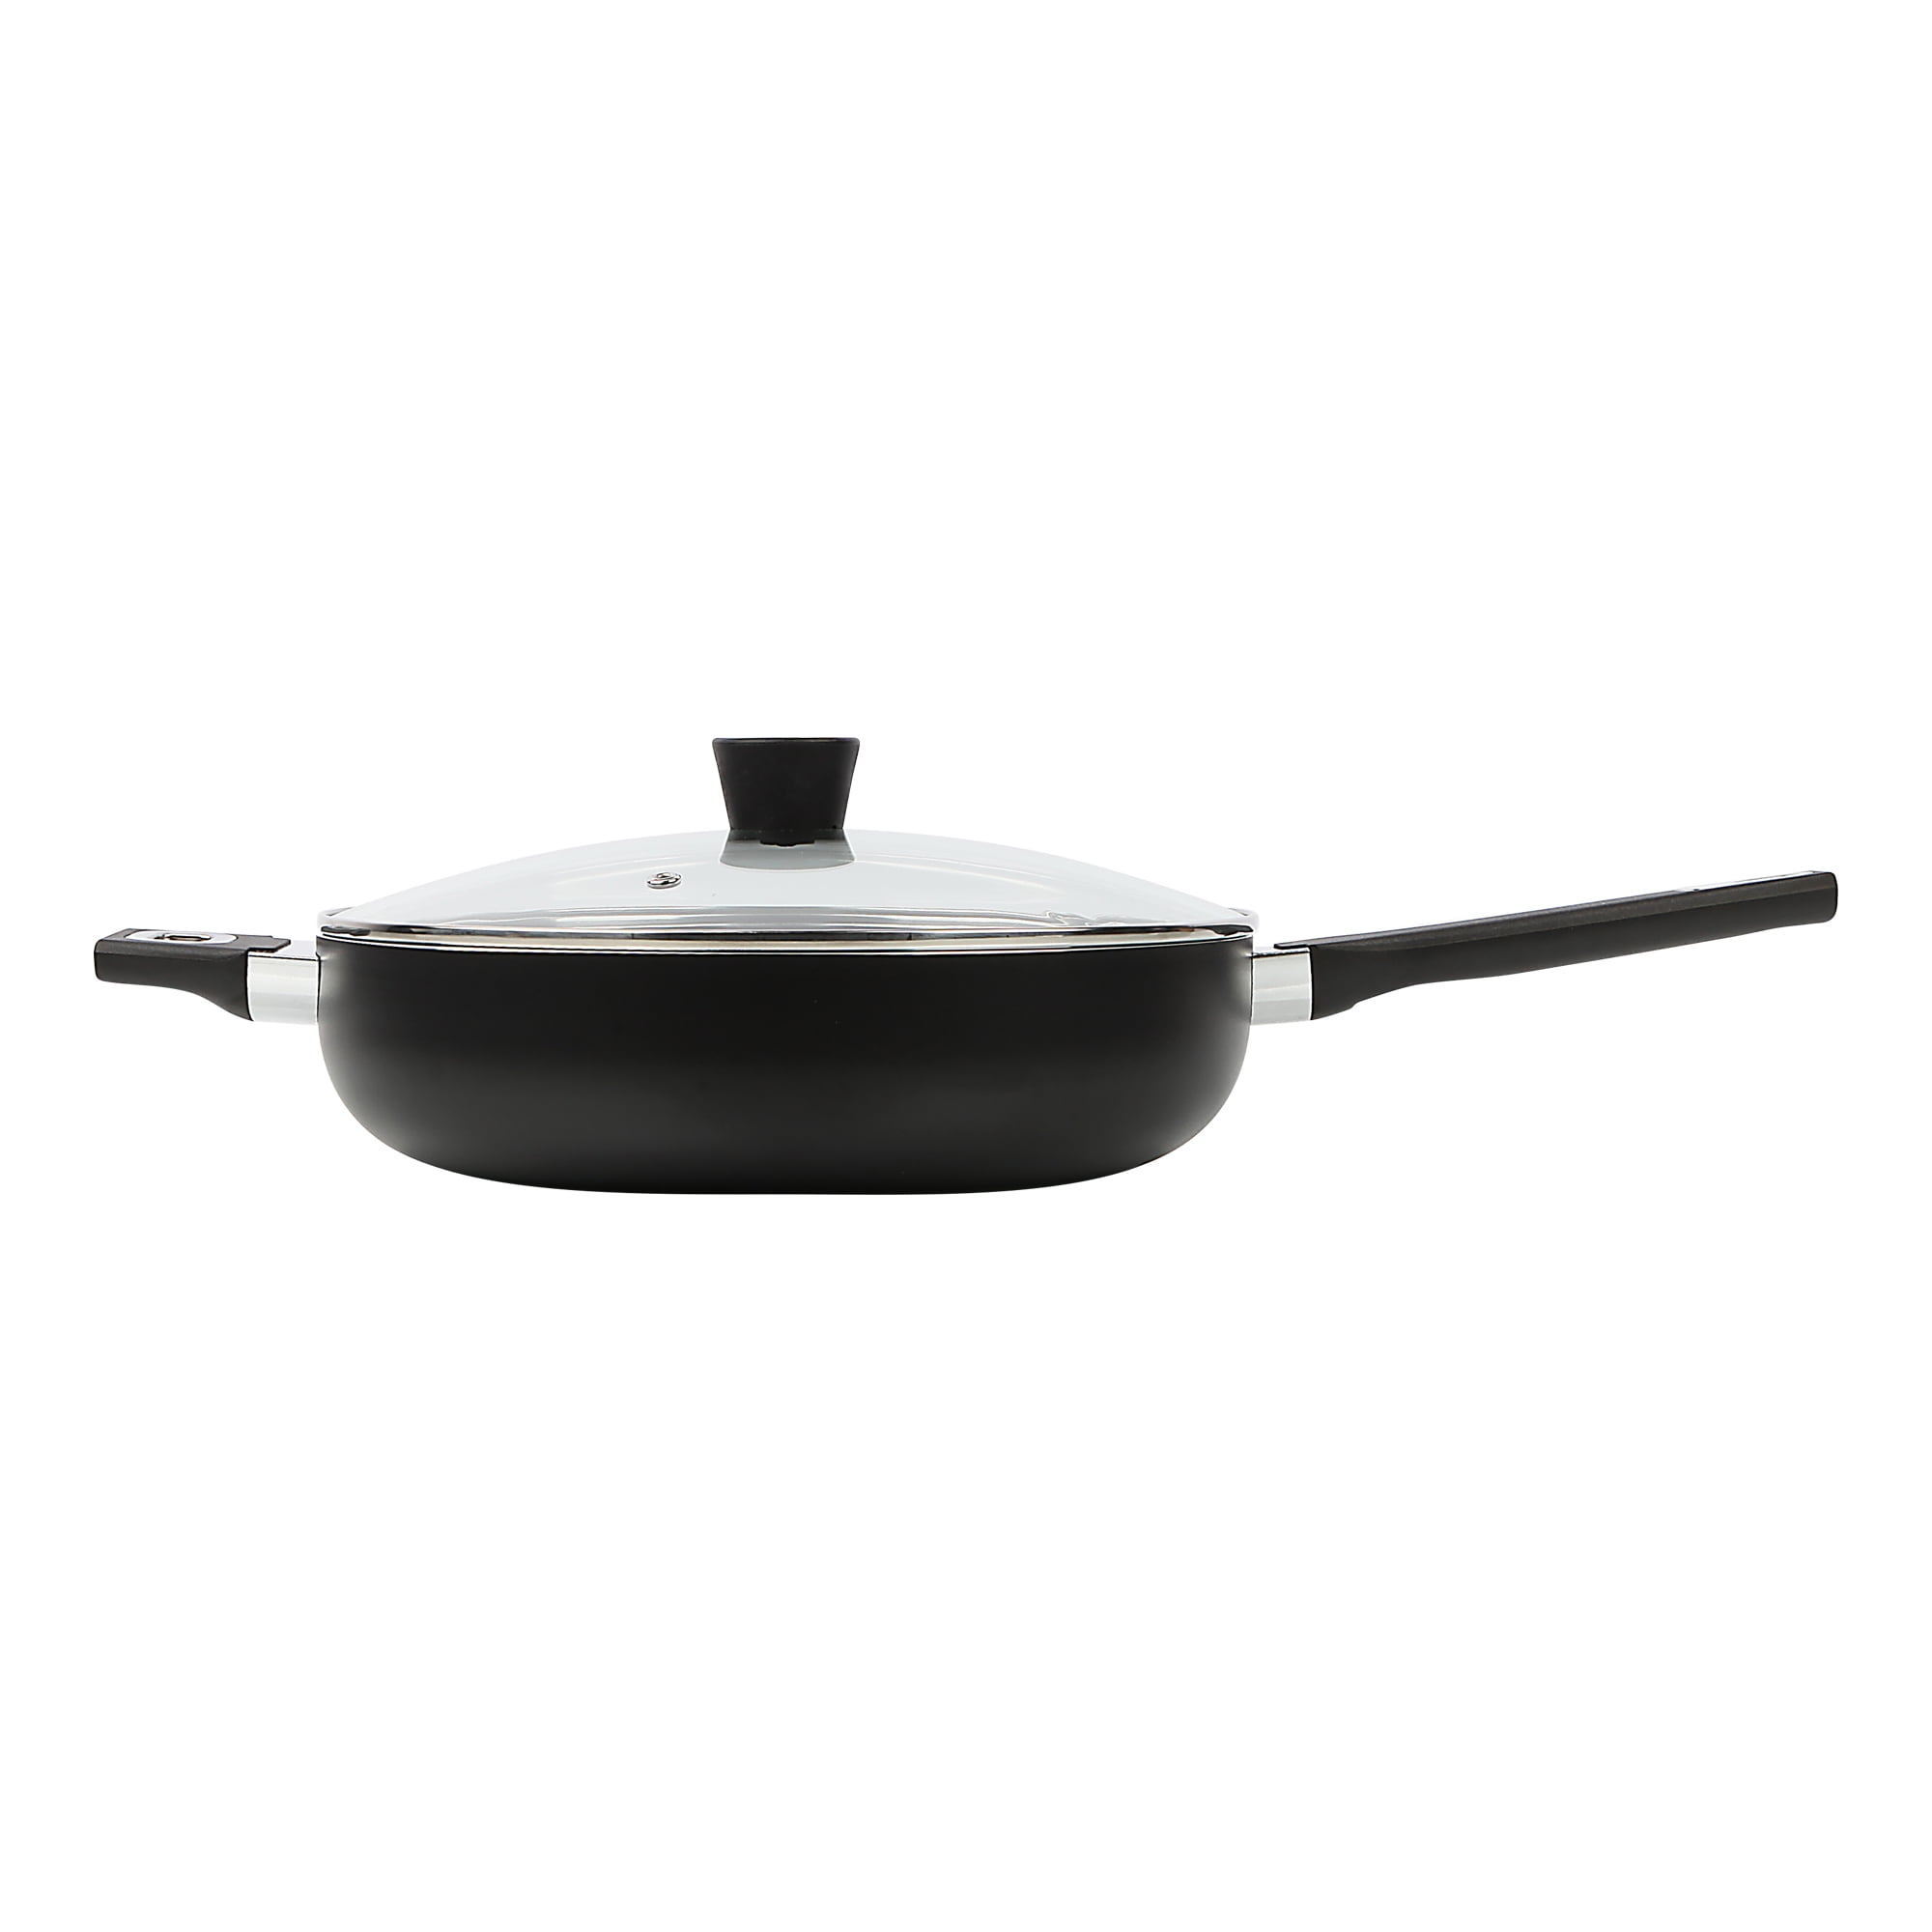 Total Nonstick 5qt Jumbo Cooker with Lid - 2774863